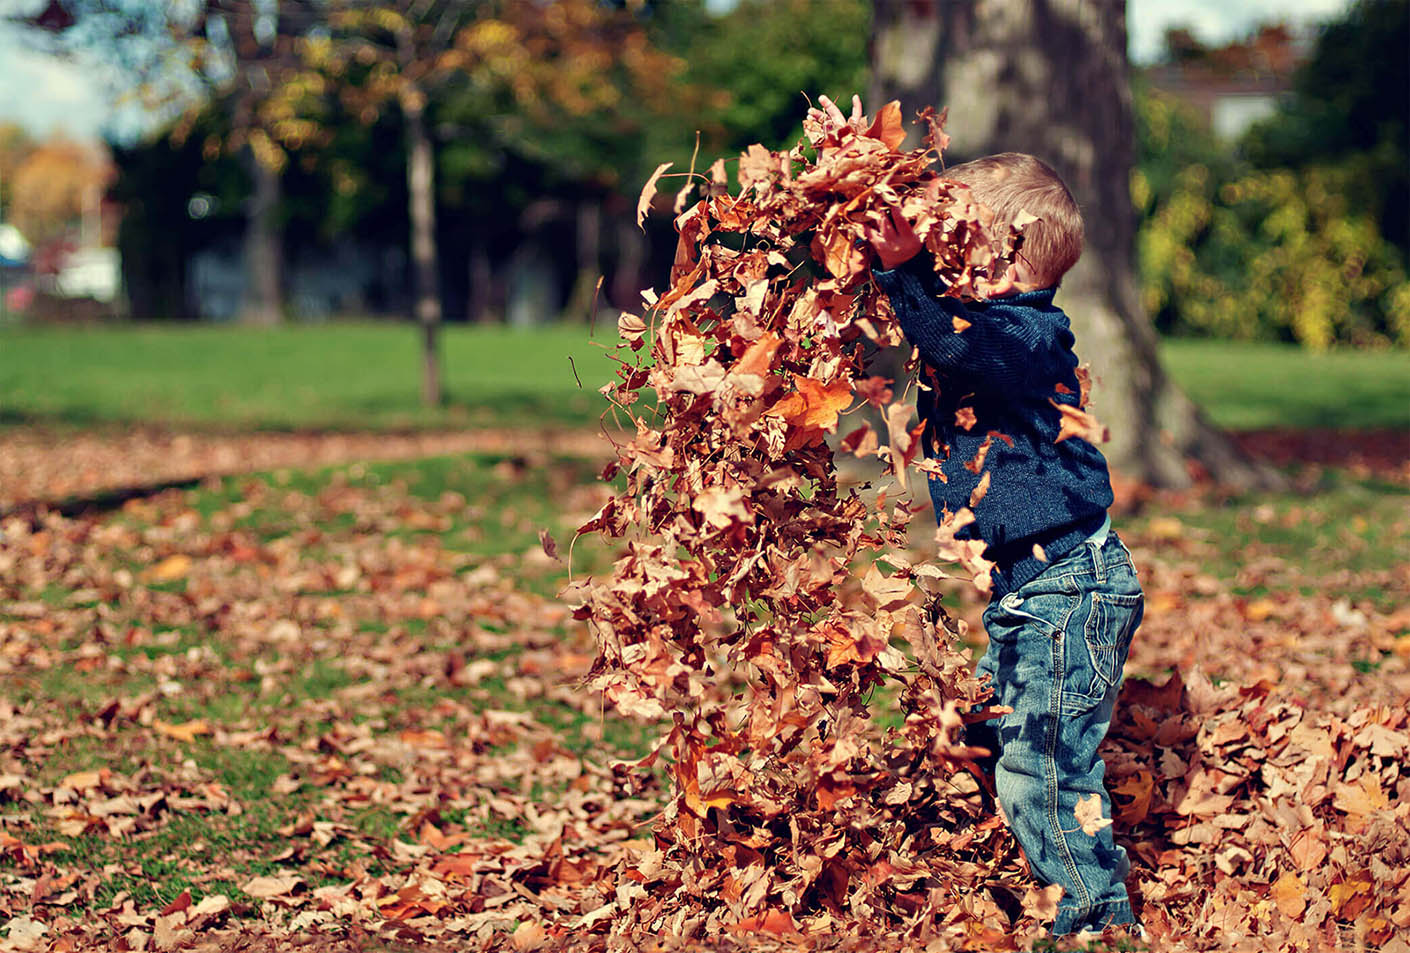 Child playing in a pile of leaves